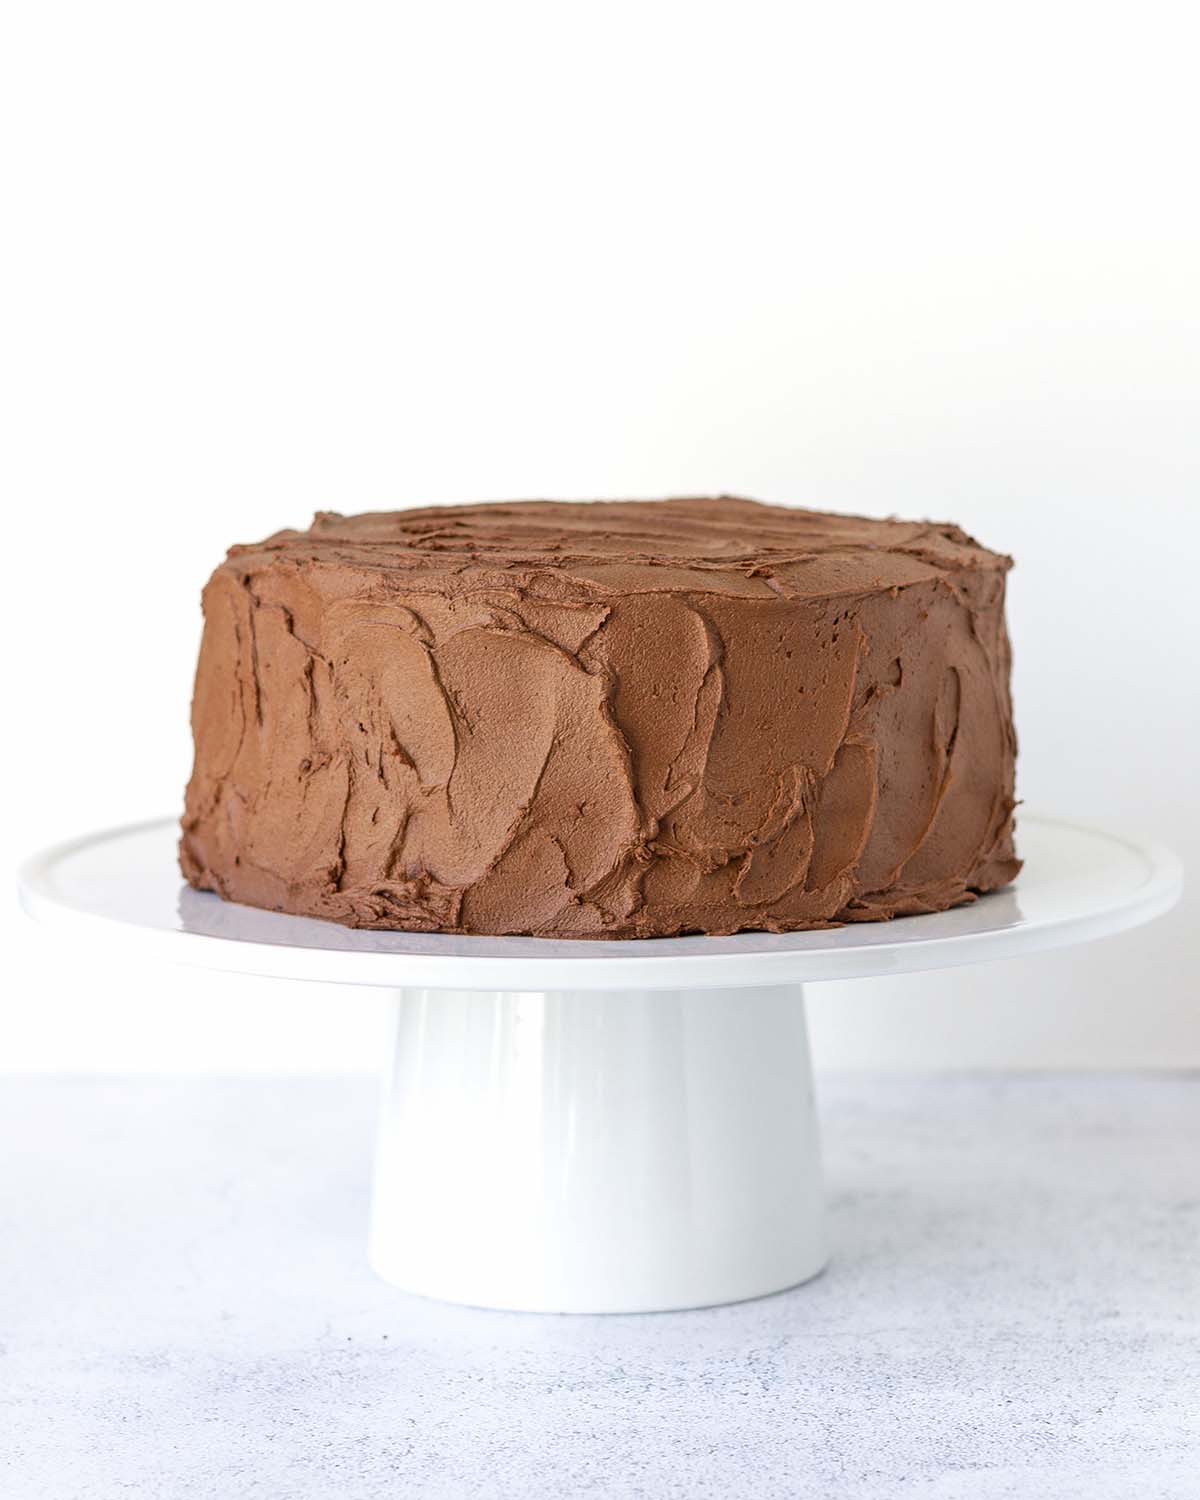 A gluten-free vegan chocolate cake frosted with chocolate buttercream sitting on a white ceramic cake stand.